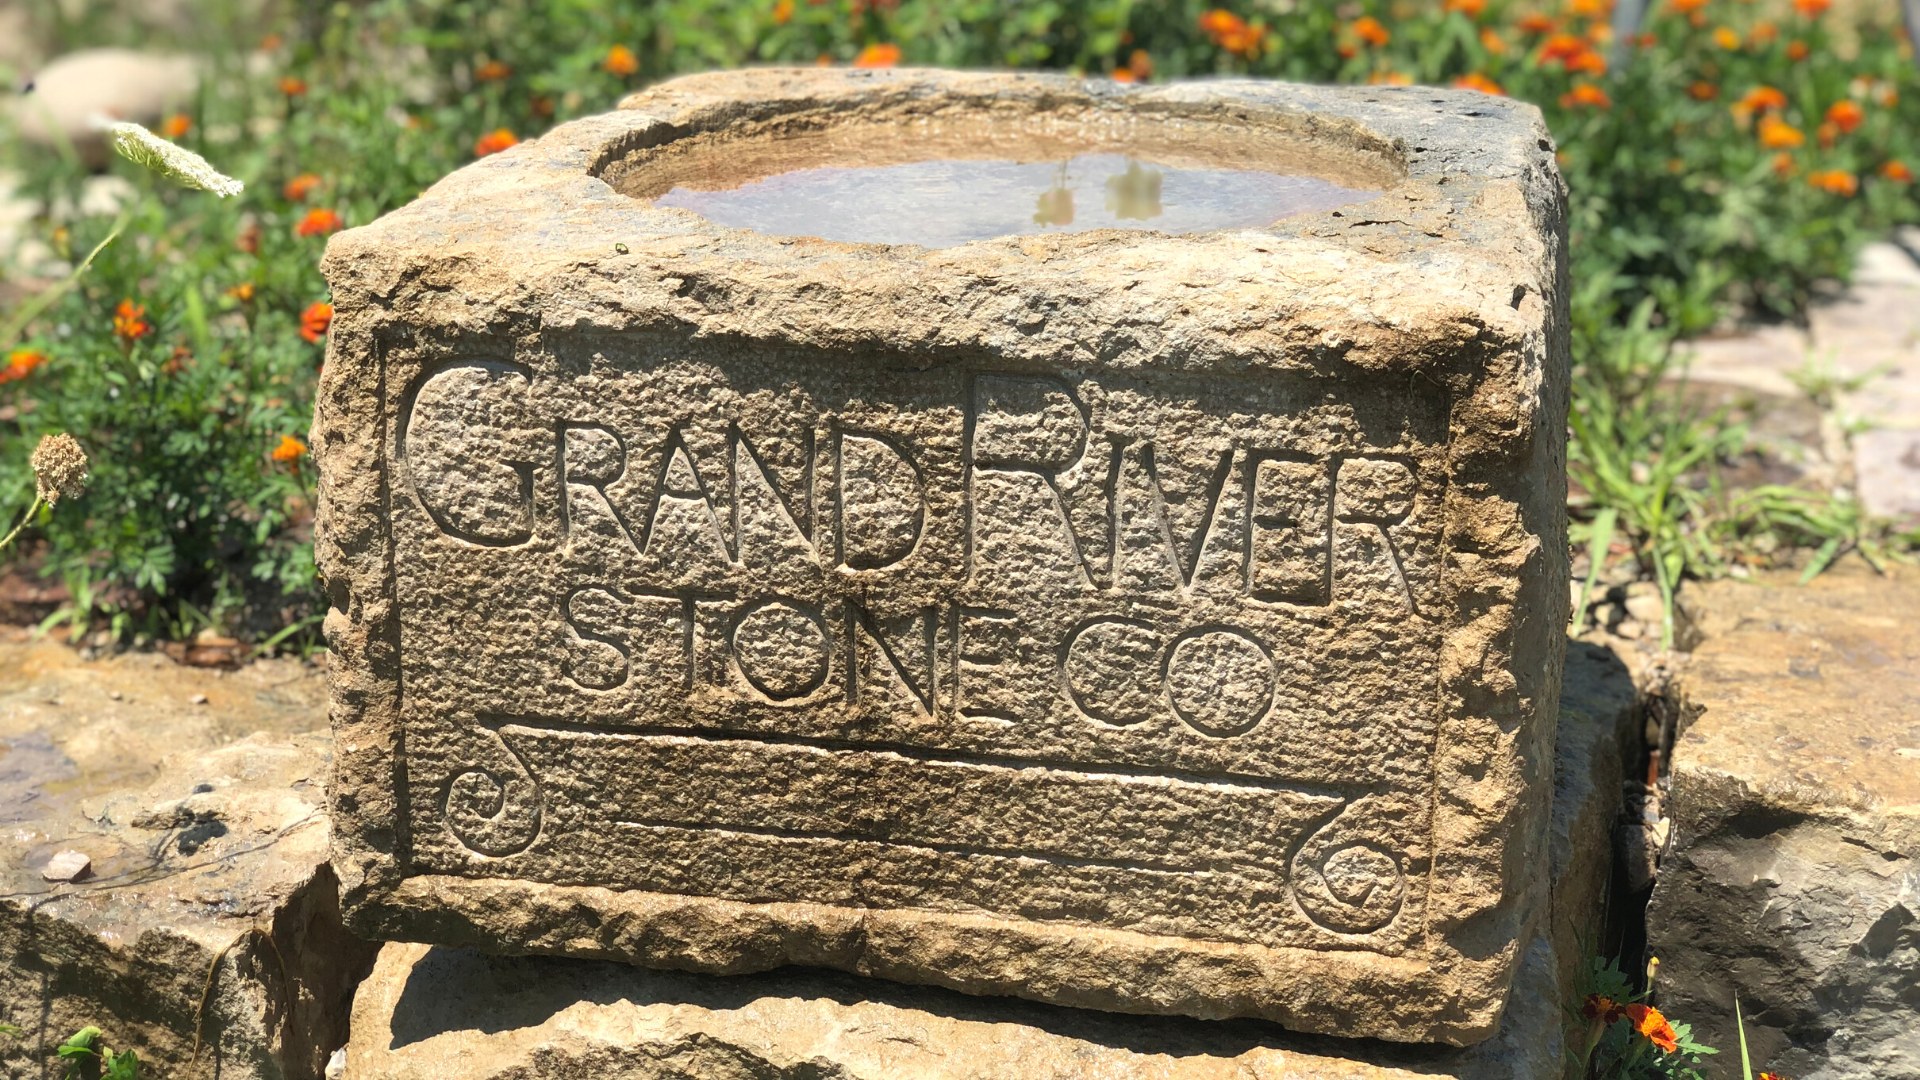 Grand River Stone water fixture